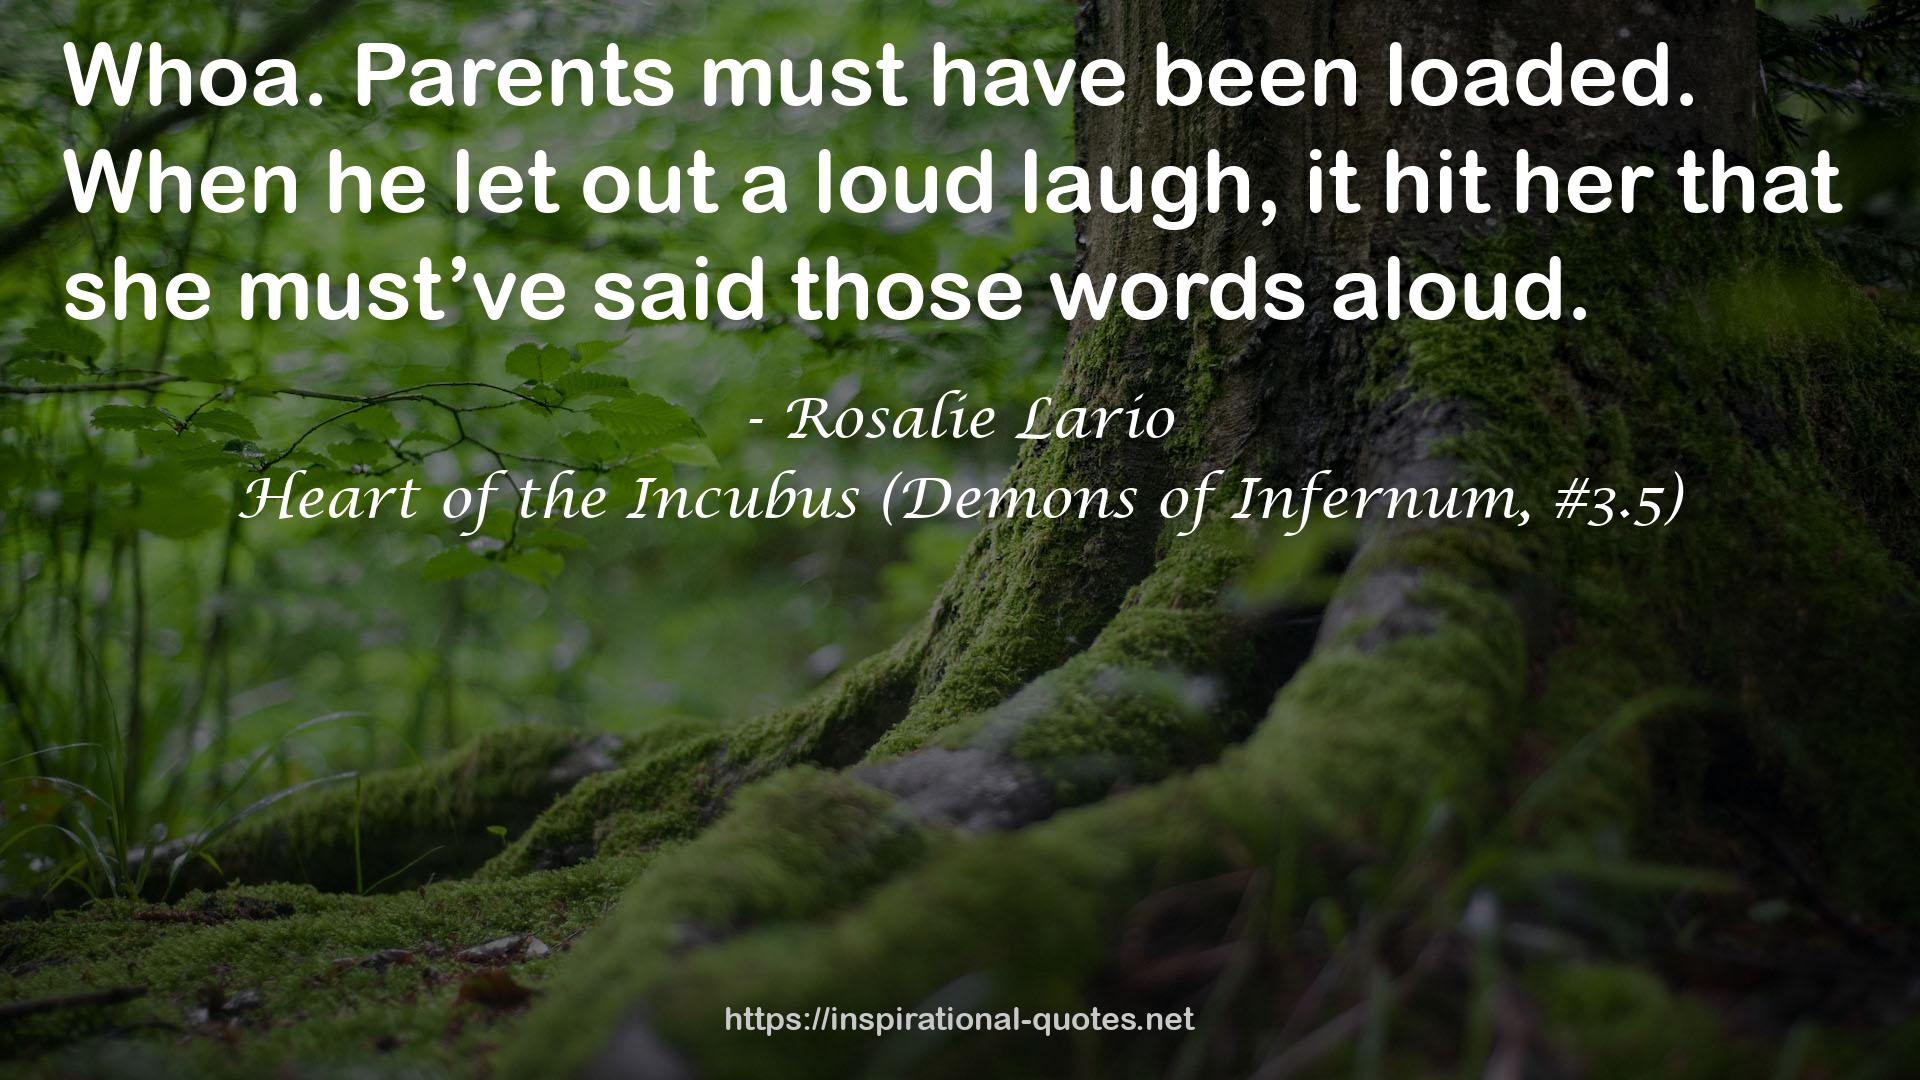 Heart of the Incubus (Demons of Infernum, #3.5) QUOTES